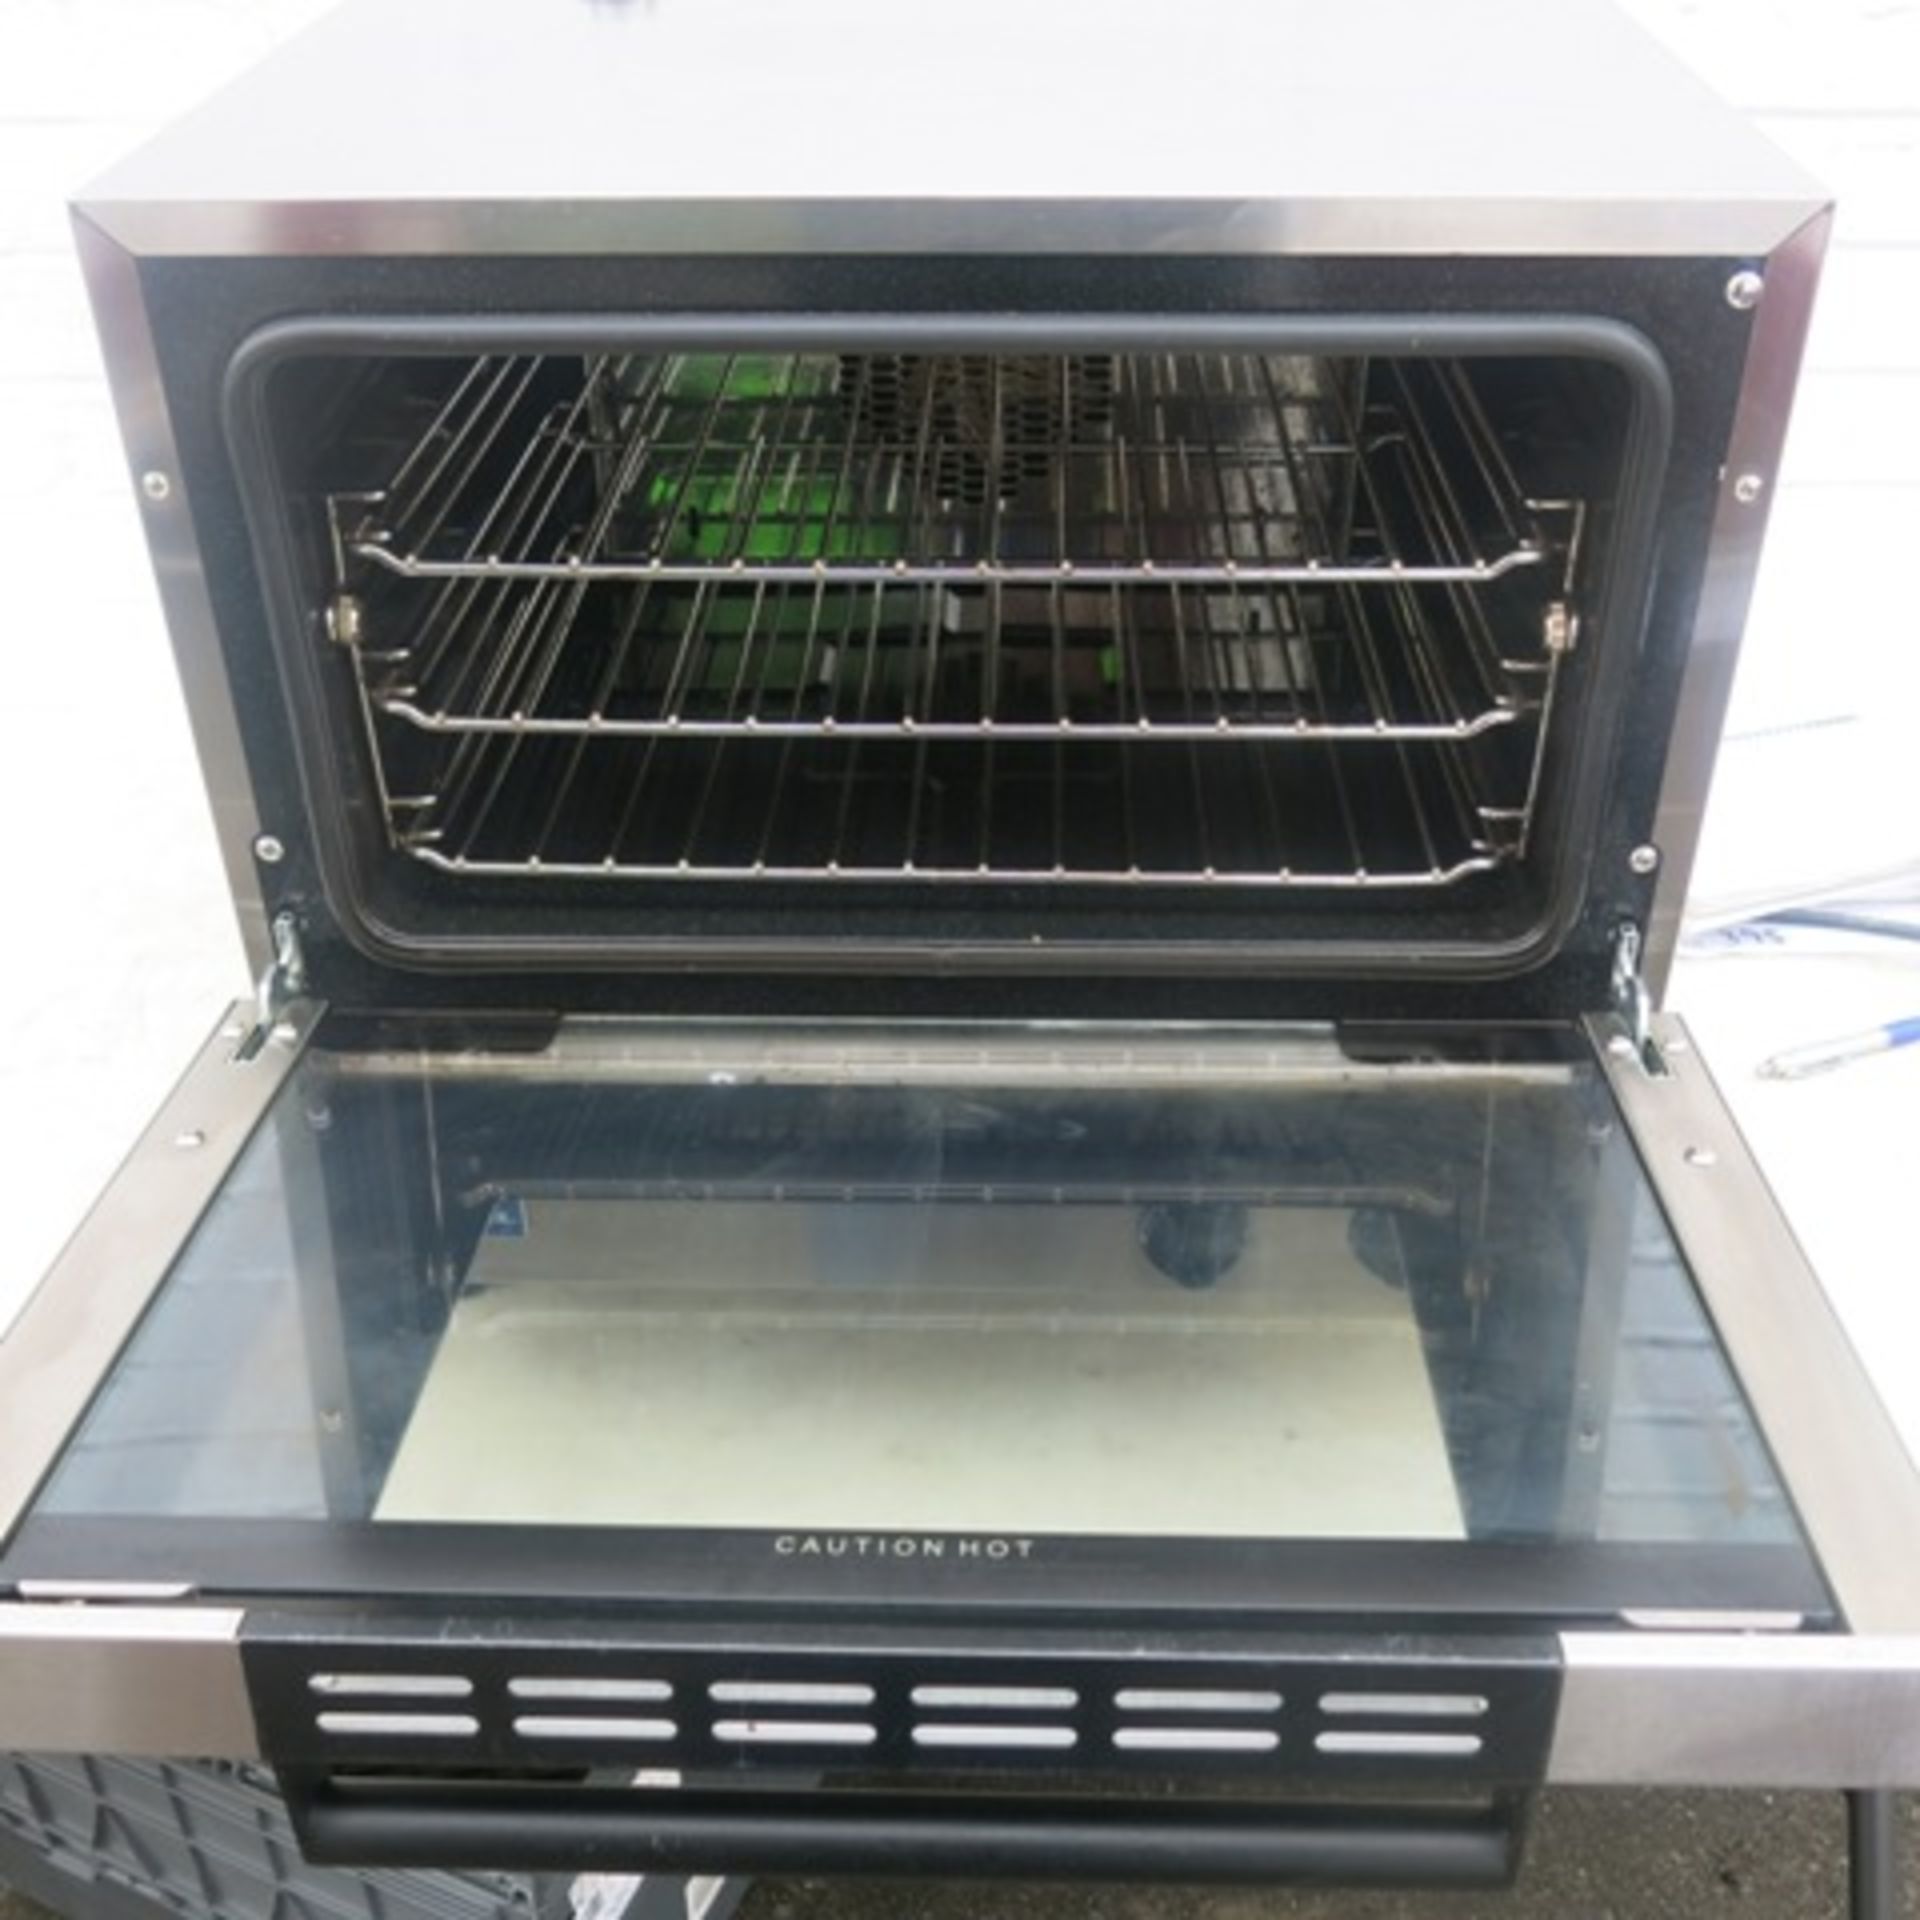 Blue Seal Counter Top Turbo Fan Convection Oven, Model E22M3. Comes with 3 Trays - Image 6 of 9